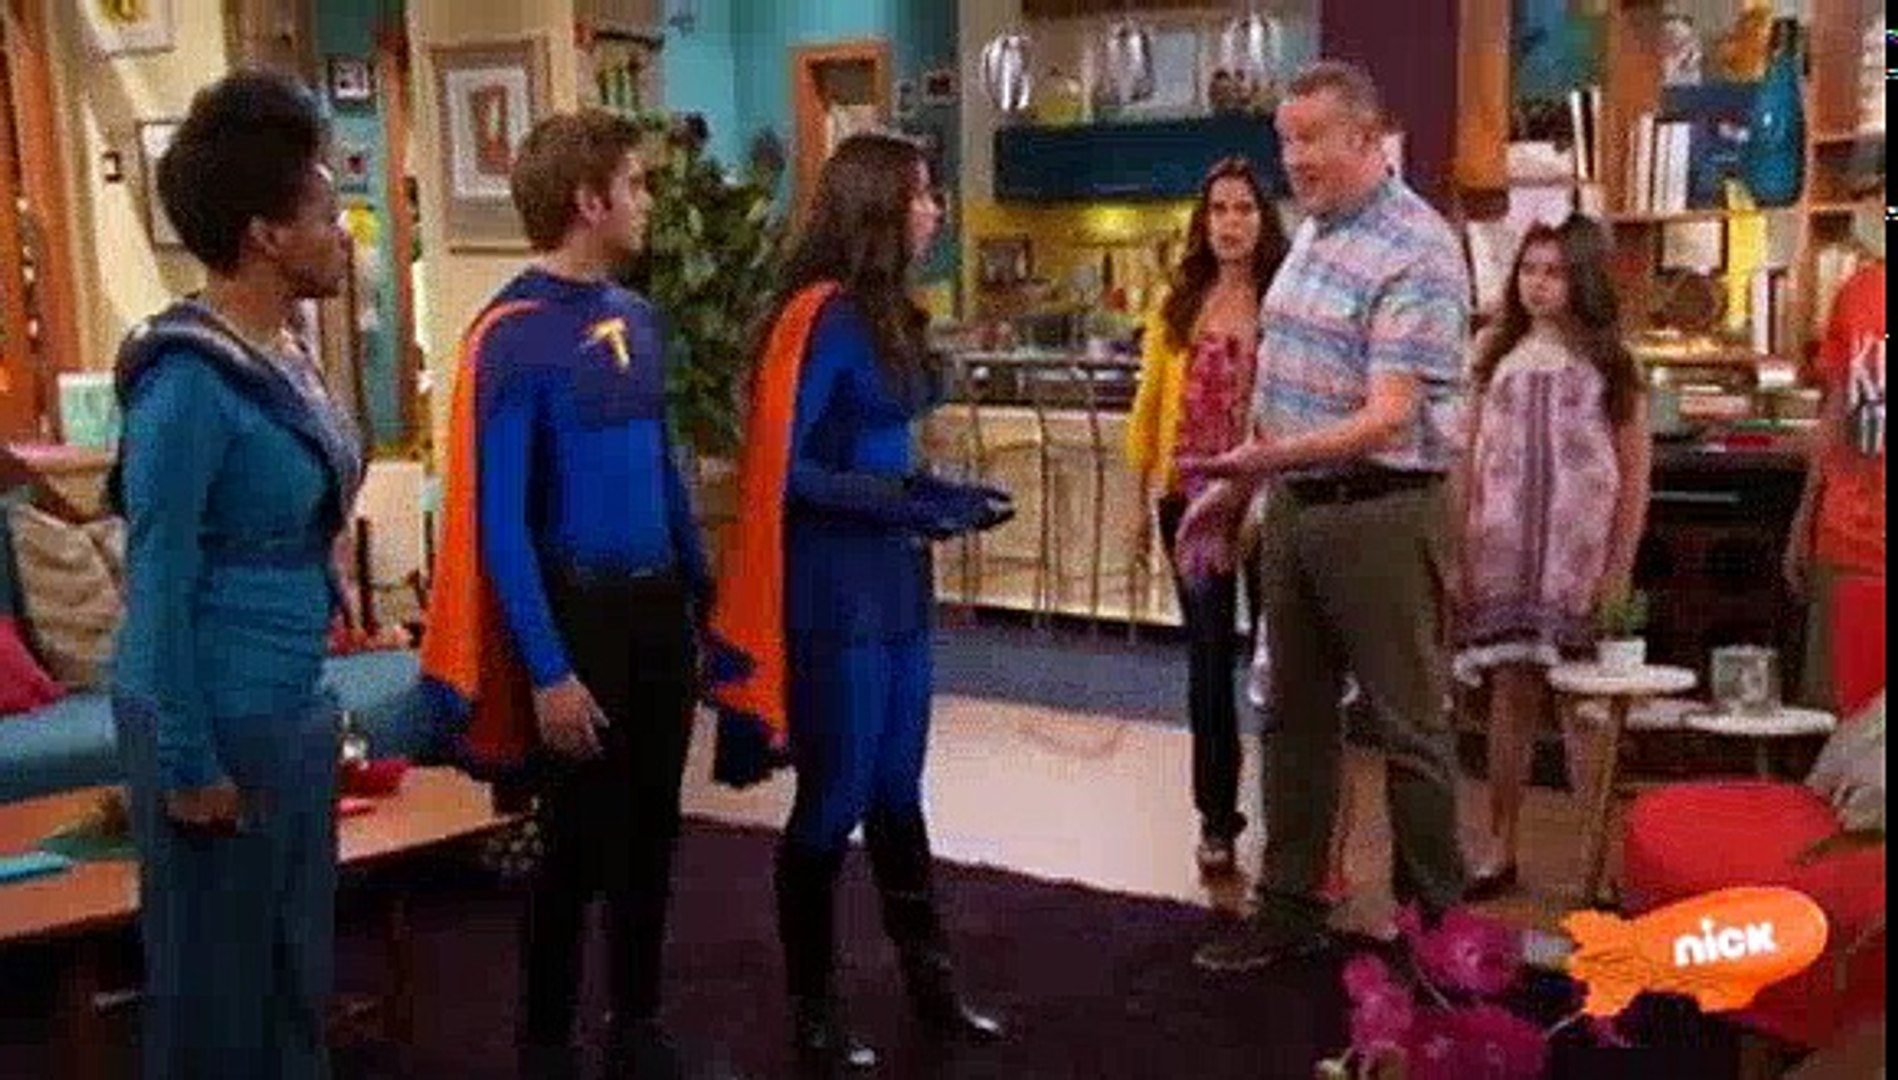 Super Suits, The Thundermans Wiki